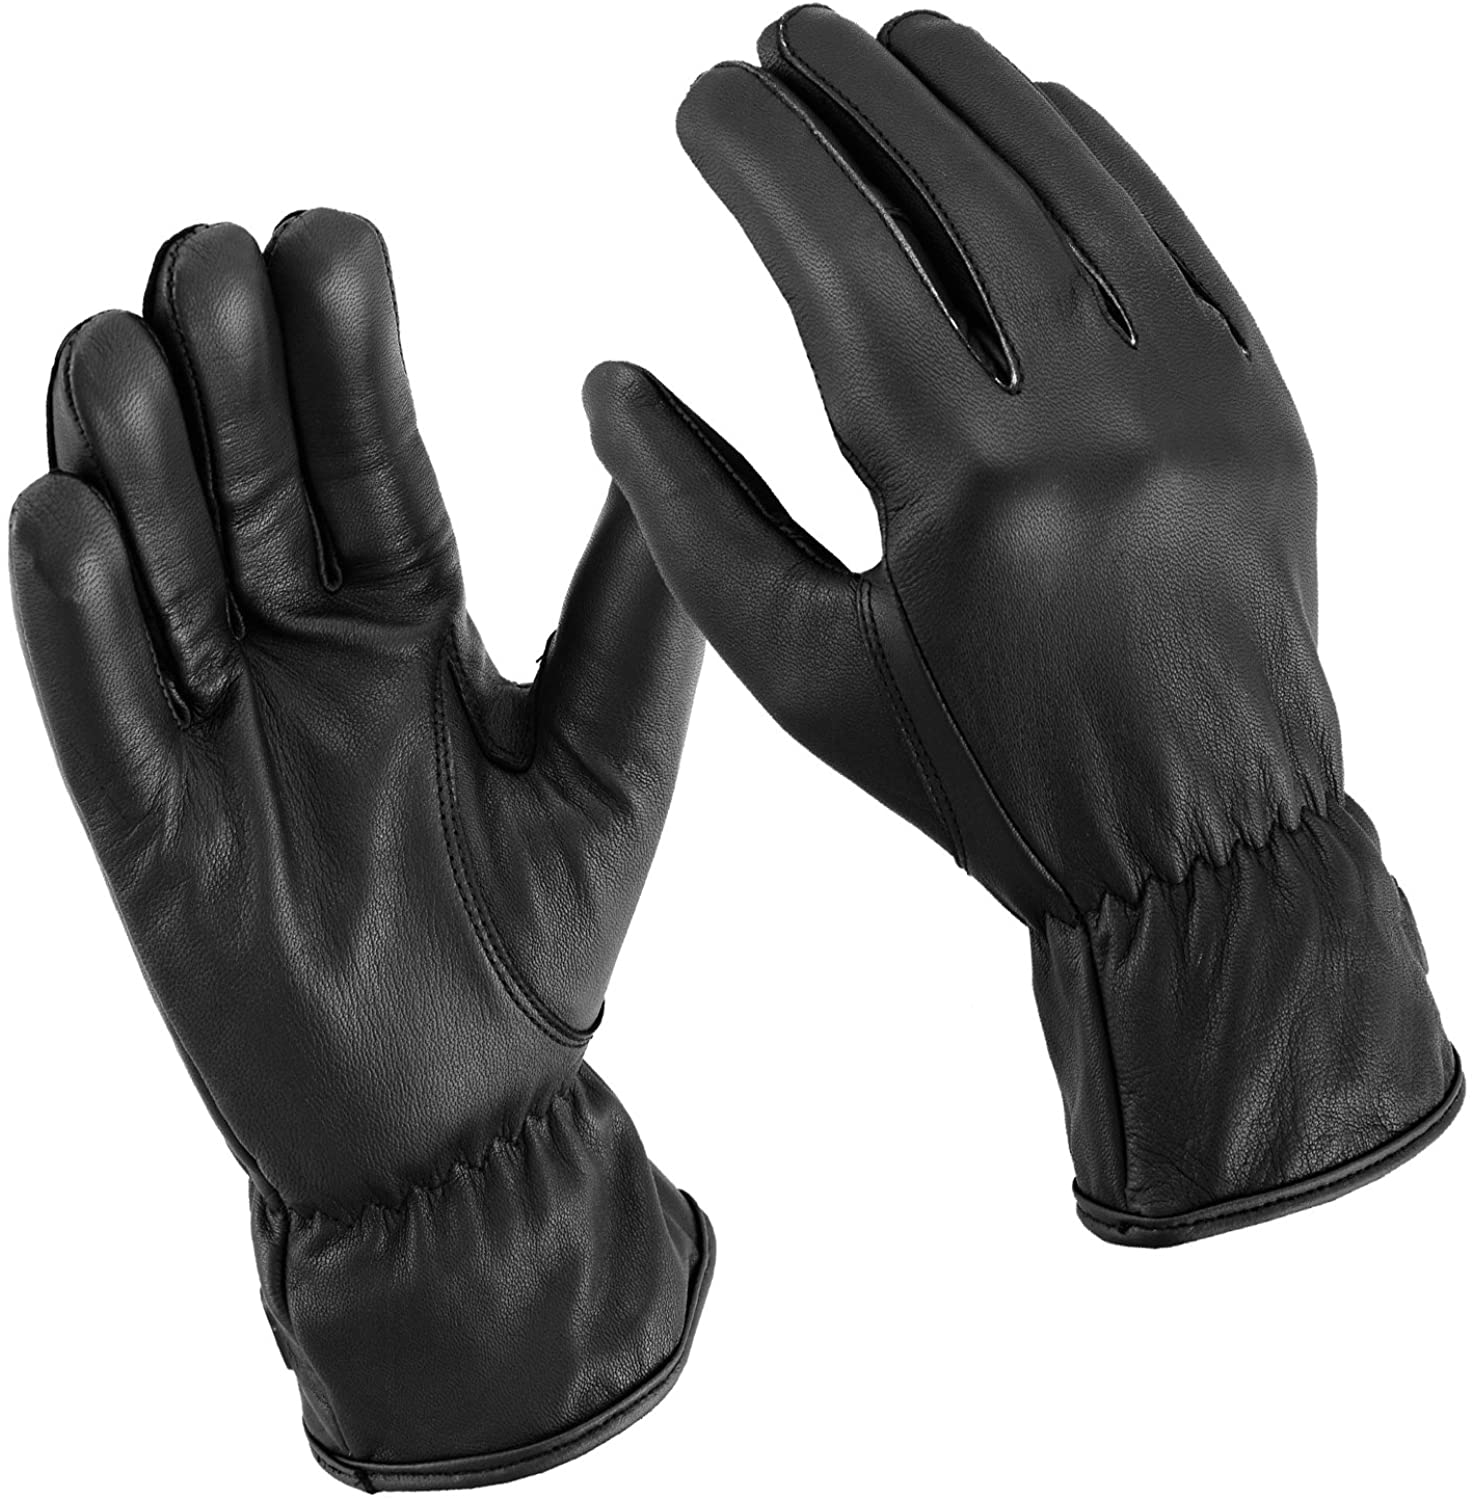 DRIVING GLOVES